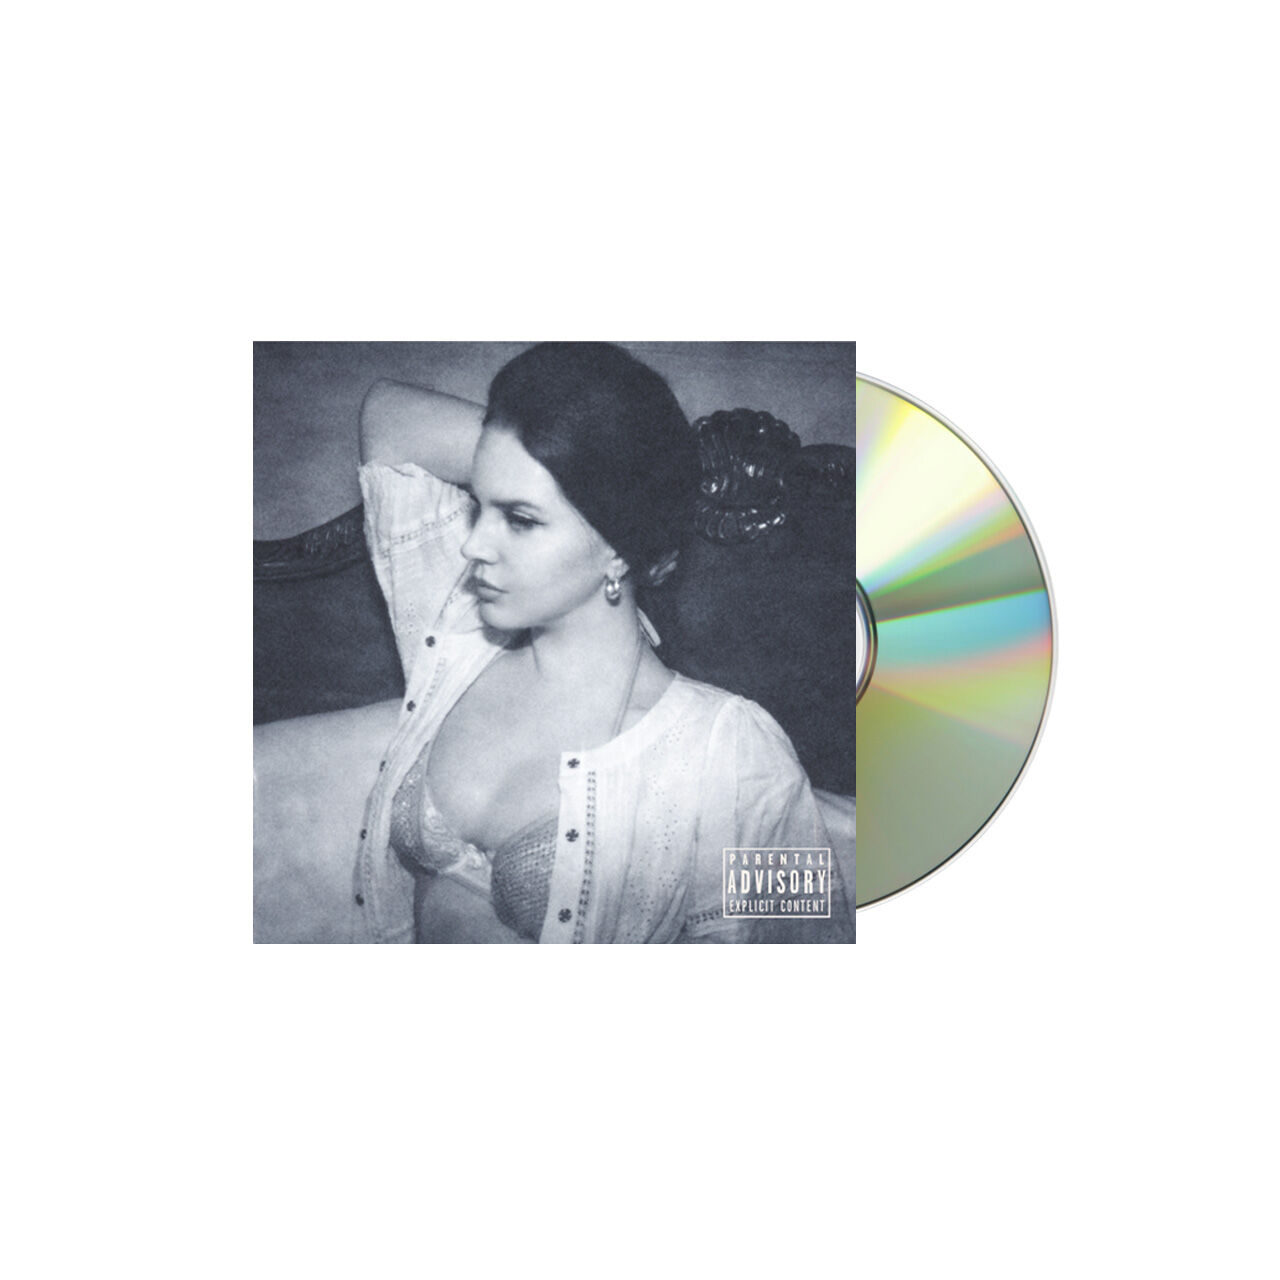 LANA DEL REY Did You Know Alternate Cover Jewel Case CD